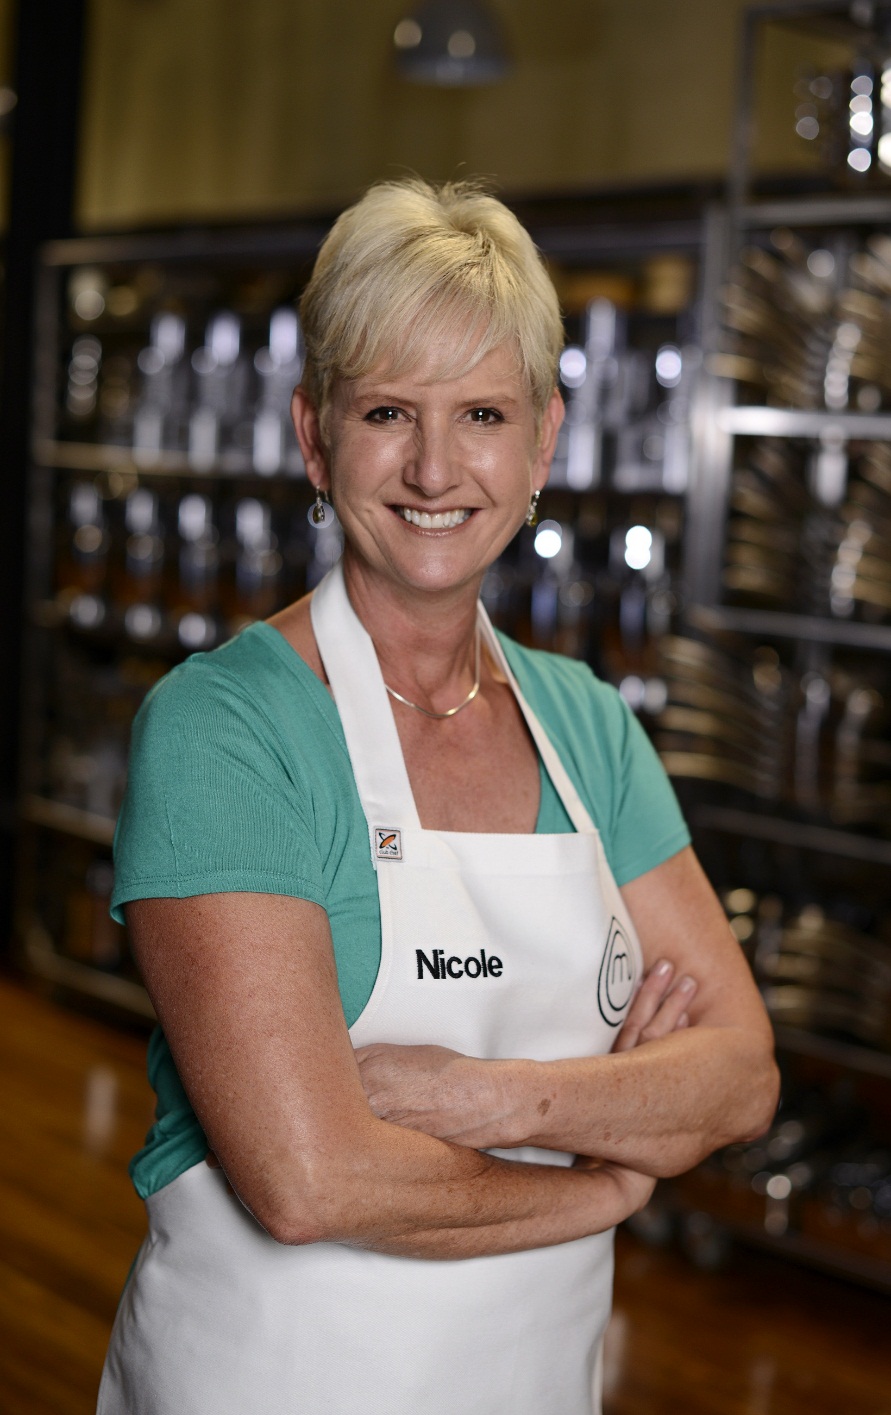   Nicole Cleave  image - supplied 